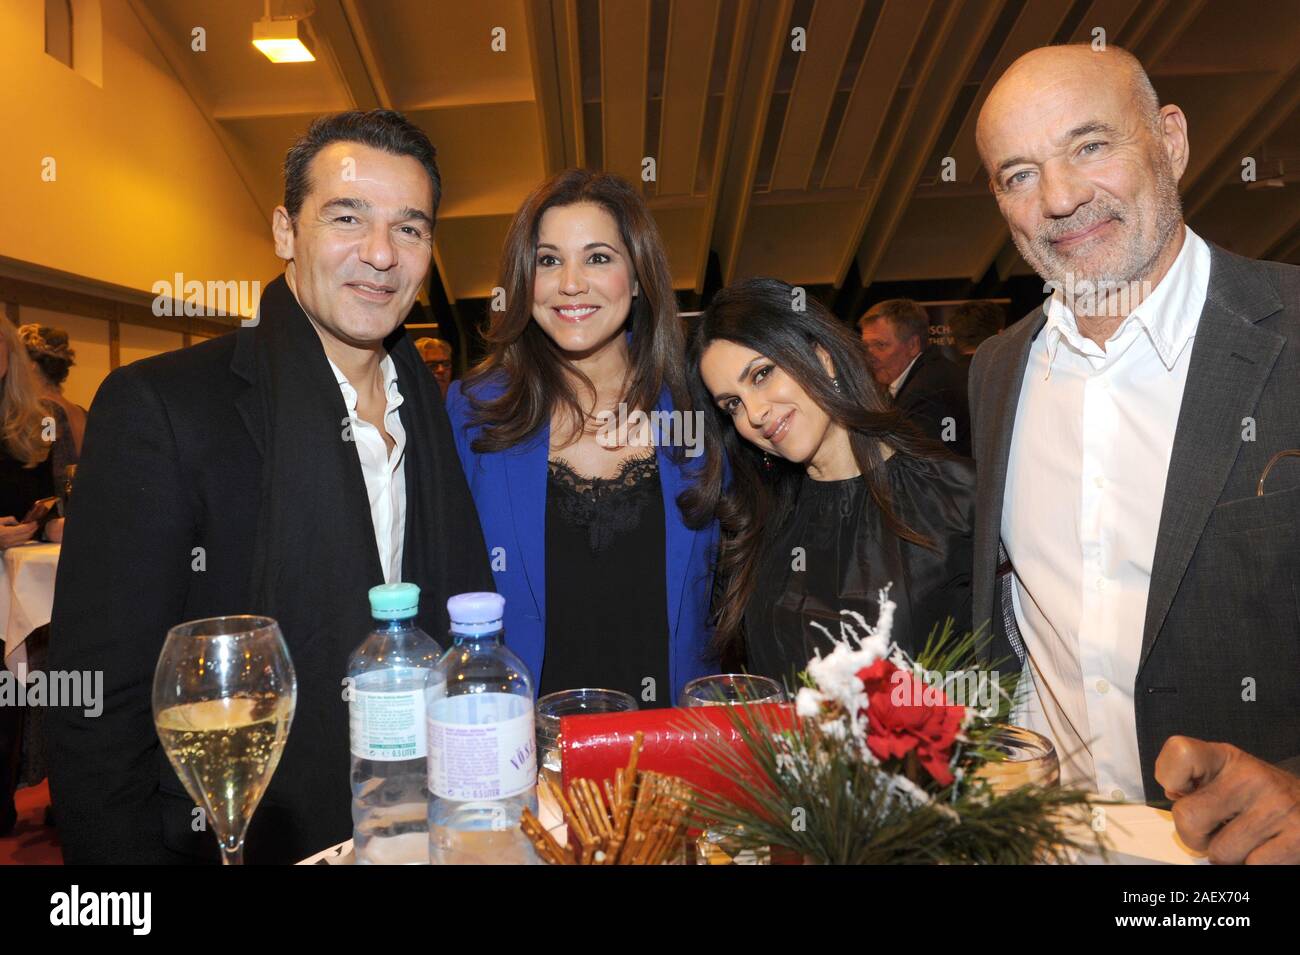 Going, Austria. 10th Dec, 2019. The actor Erol Sander (v-l), the host Karen Webb, Viktoria Lauterbach and the actor Heiner Lauterbach celebrate at the Charity Fight Night in the Wellness Hotel "Stanglwirt" in Going near Kitzbühel. The proceeds will be donated to the "Tribute to Bambi - Kleine Helden e.V. Stiftung". Credit: Ursula Düren/dpa/Alamy Live News Stock Photo